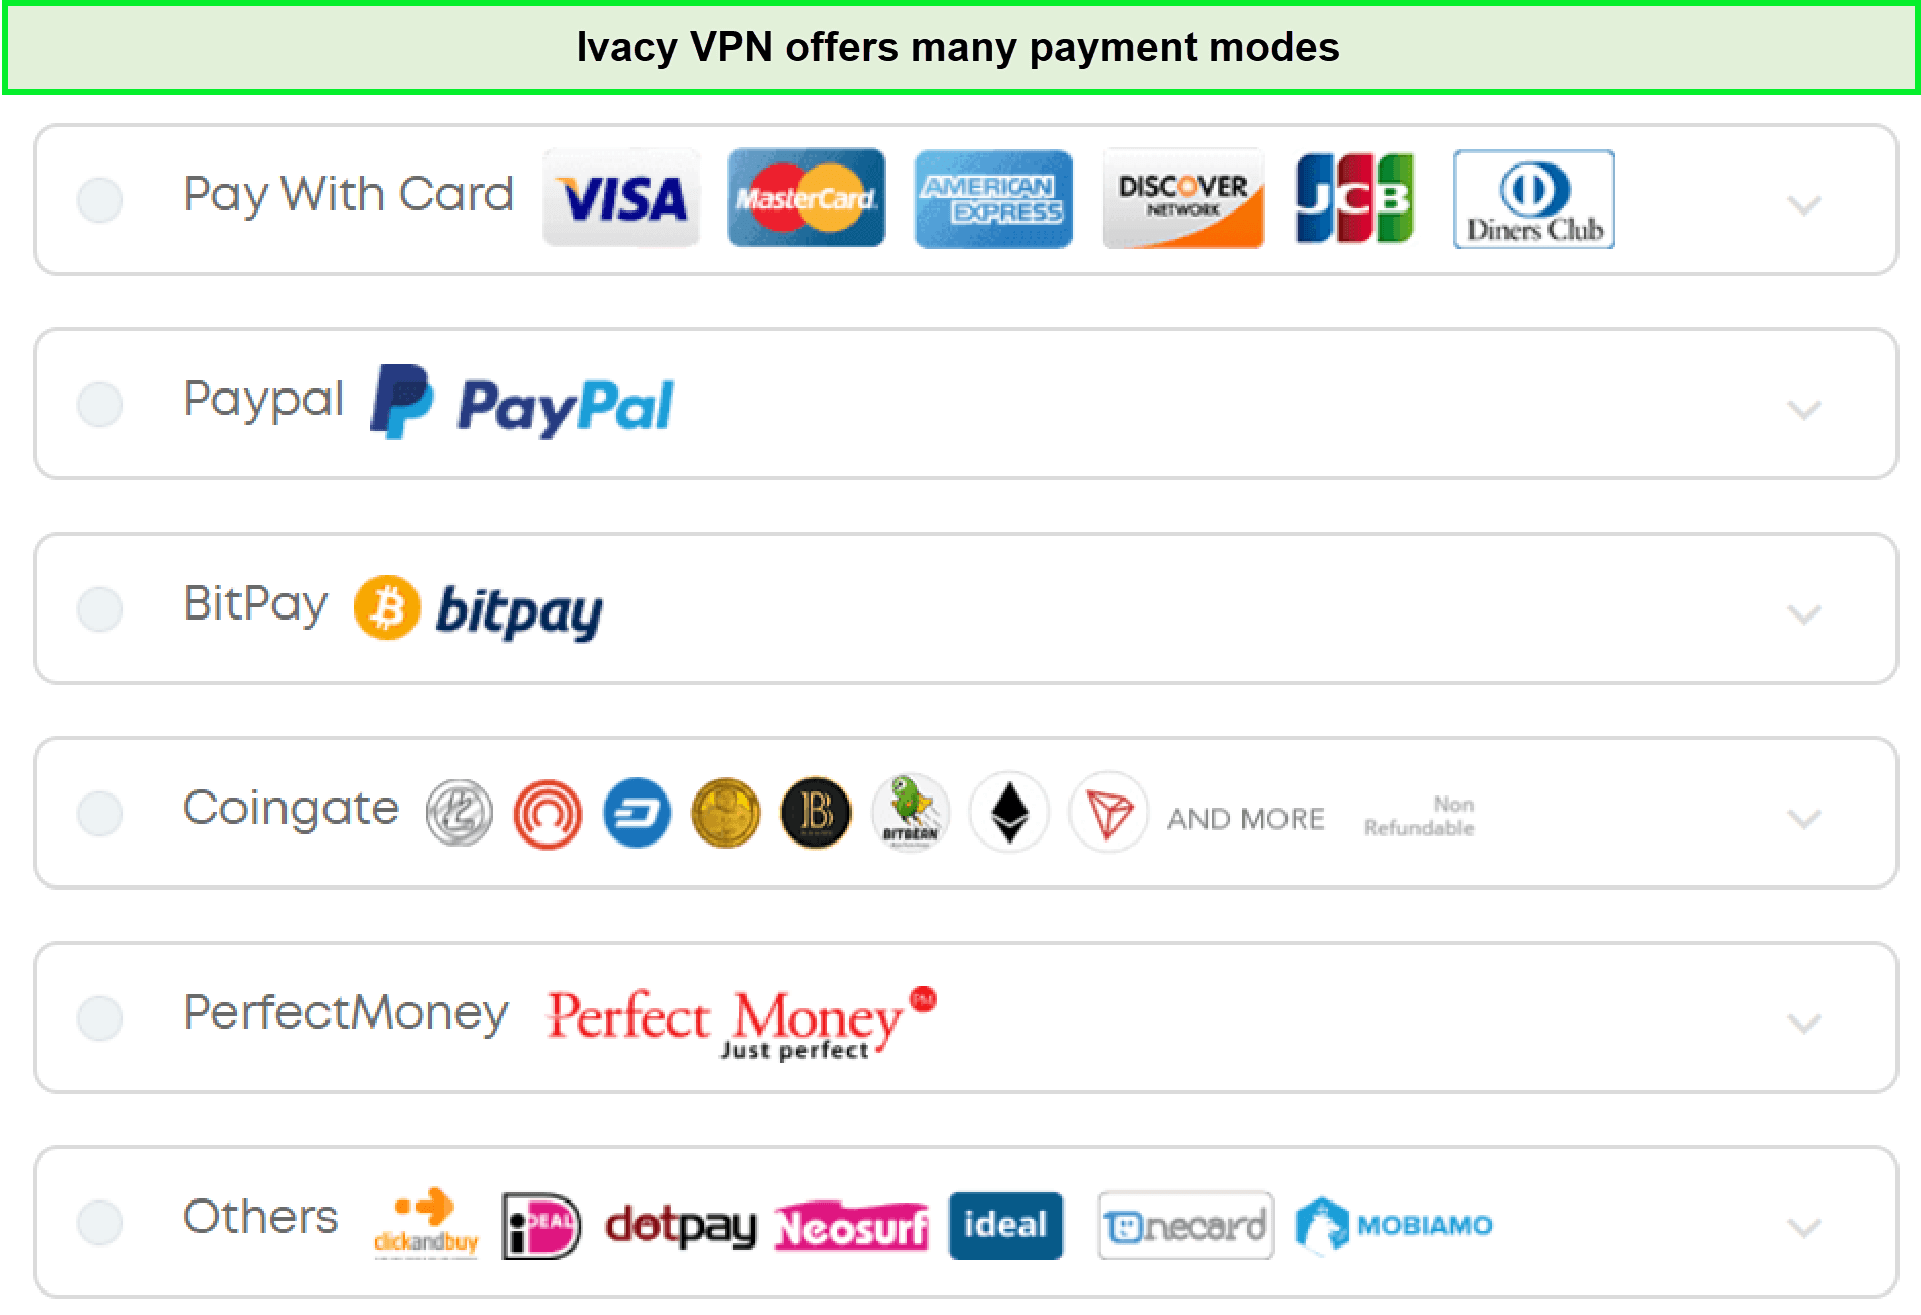 ivacy-payment-modes (1)